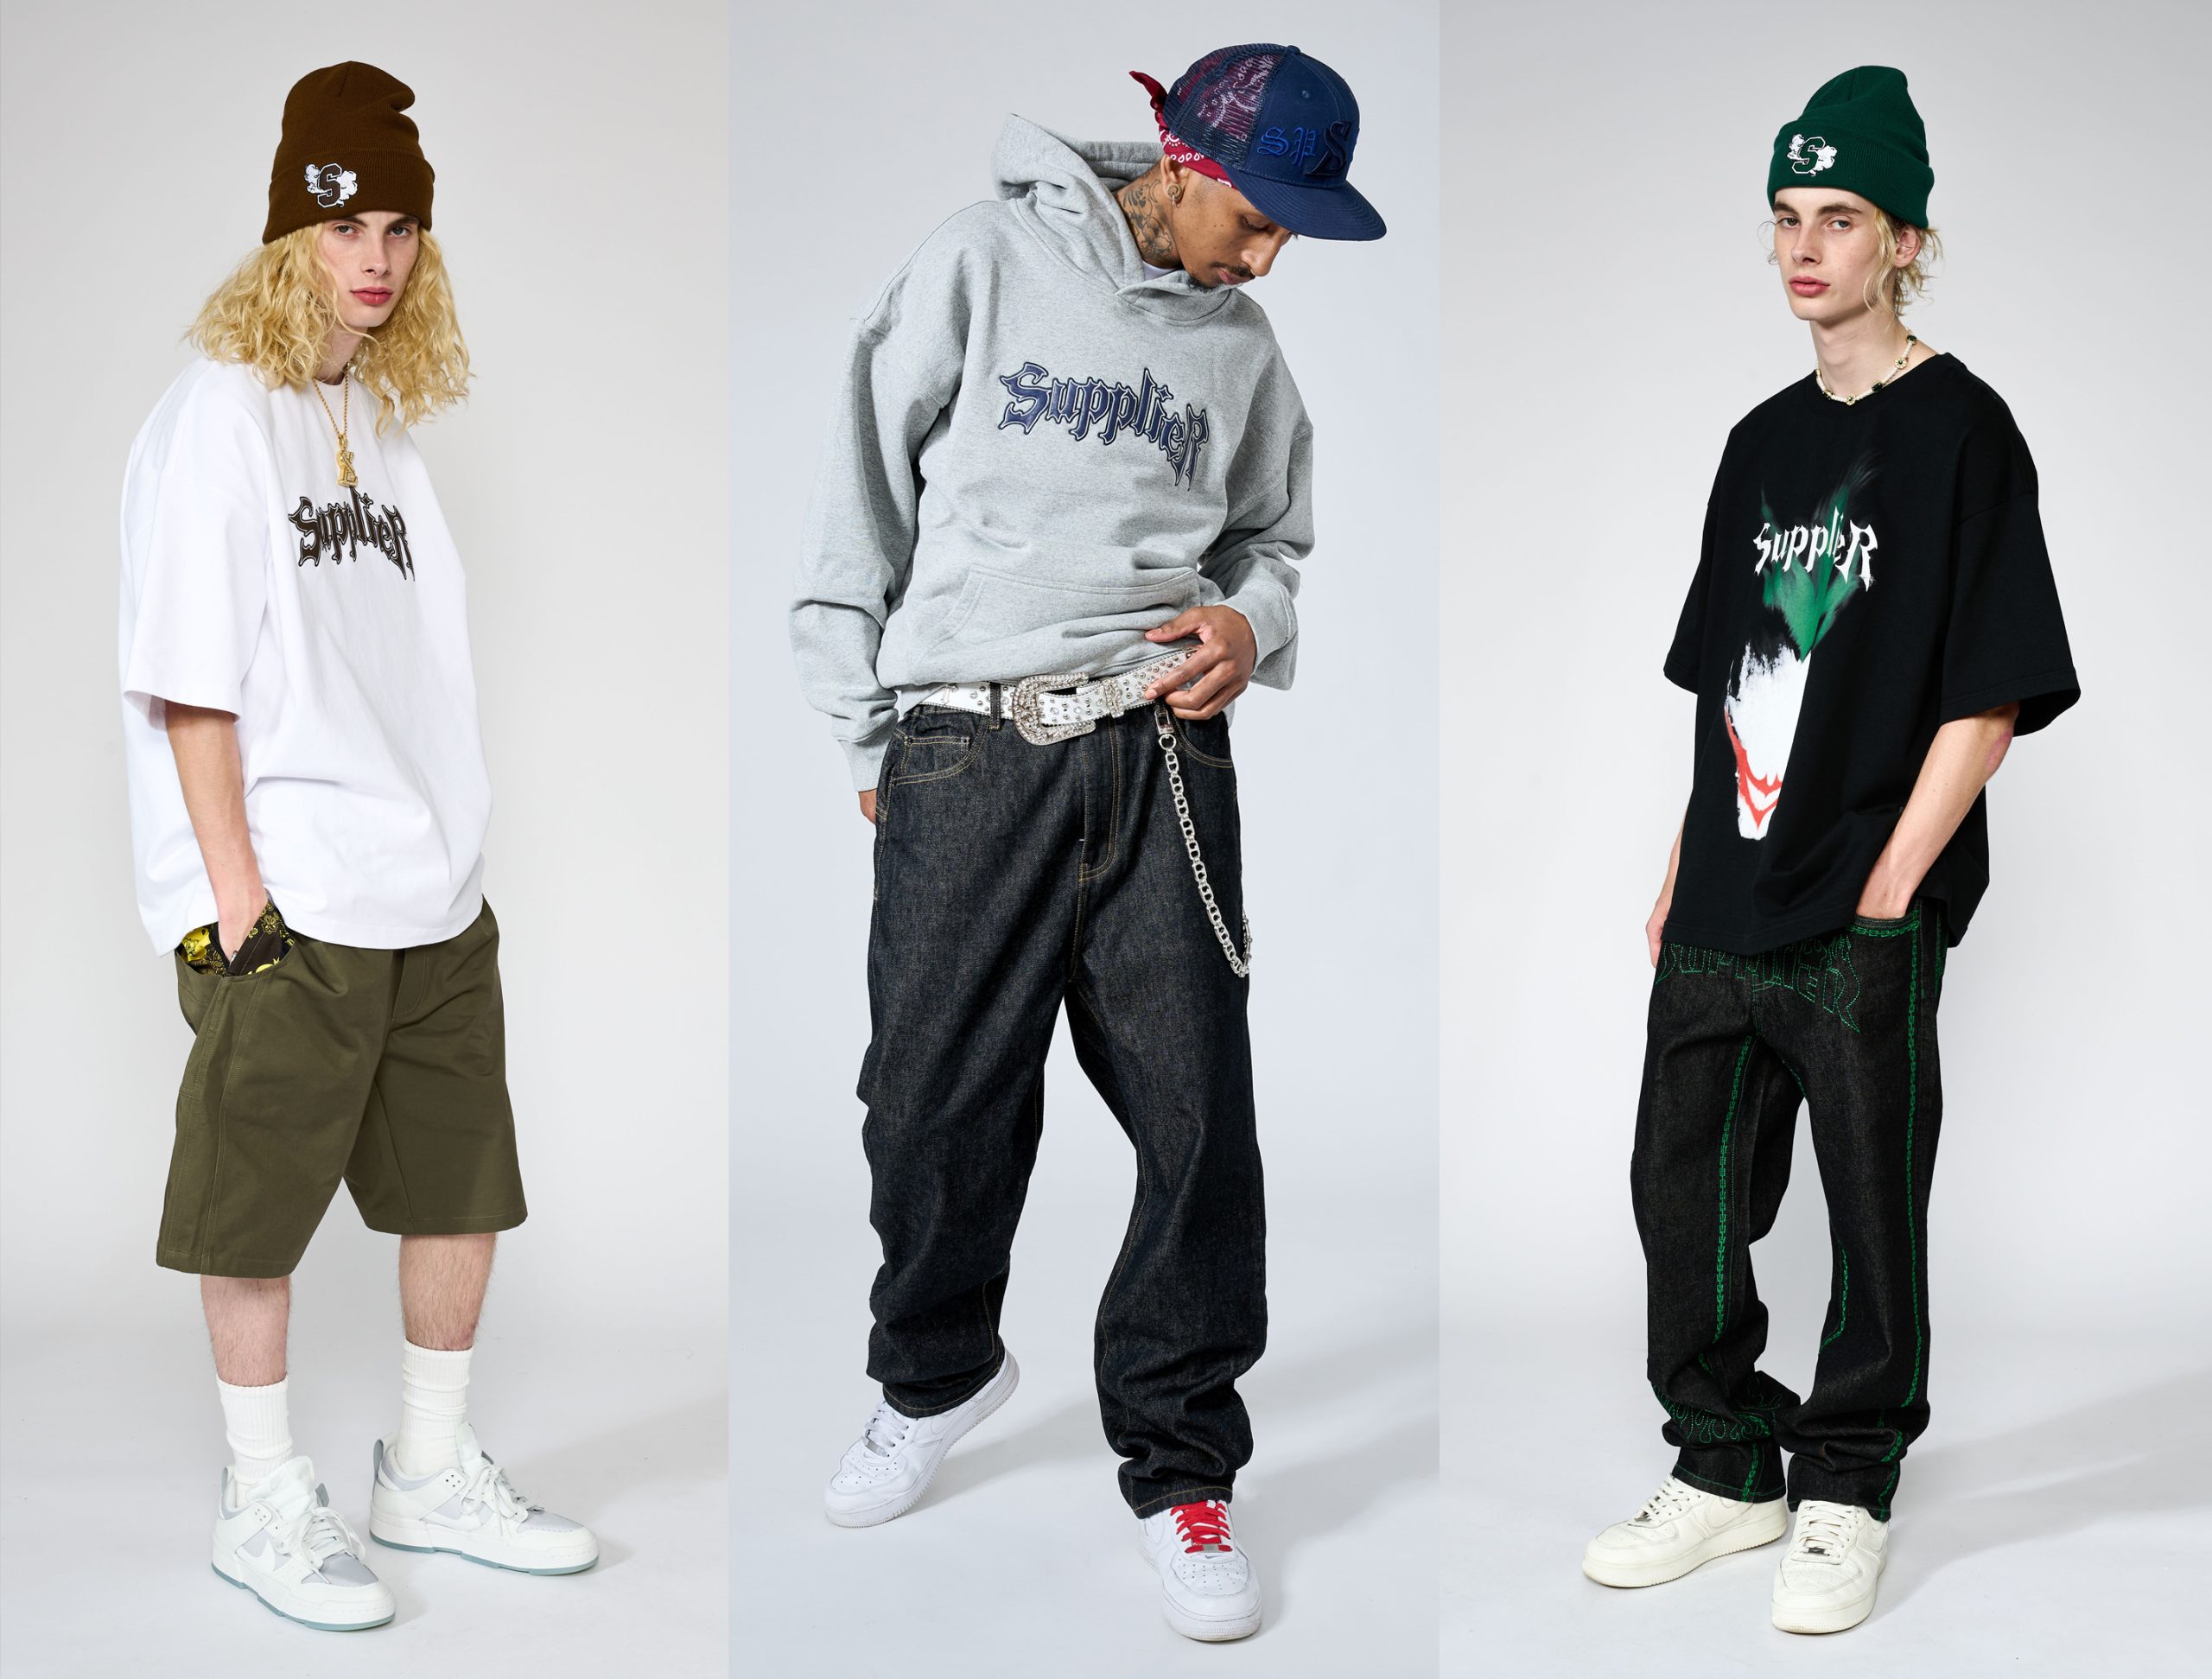 Say hello to Supplier, the innovative Japanese Streetwear brand